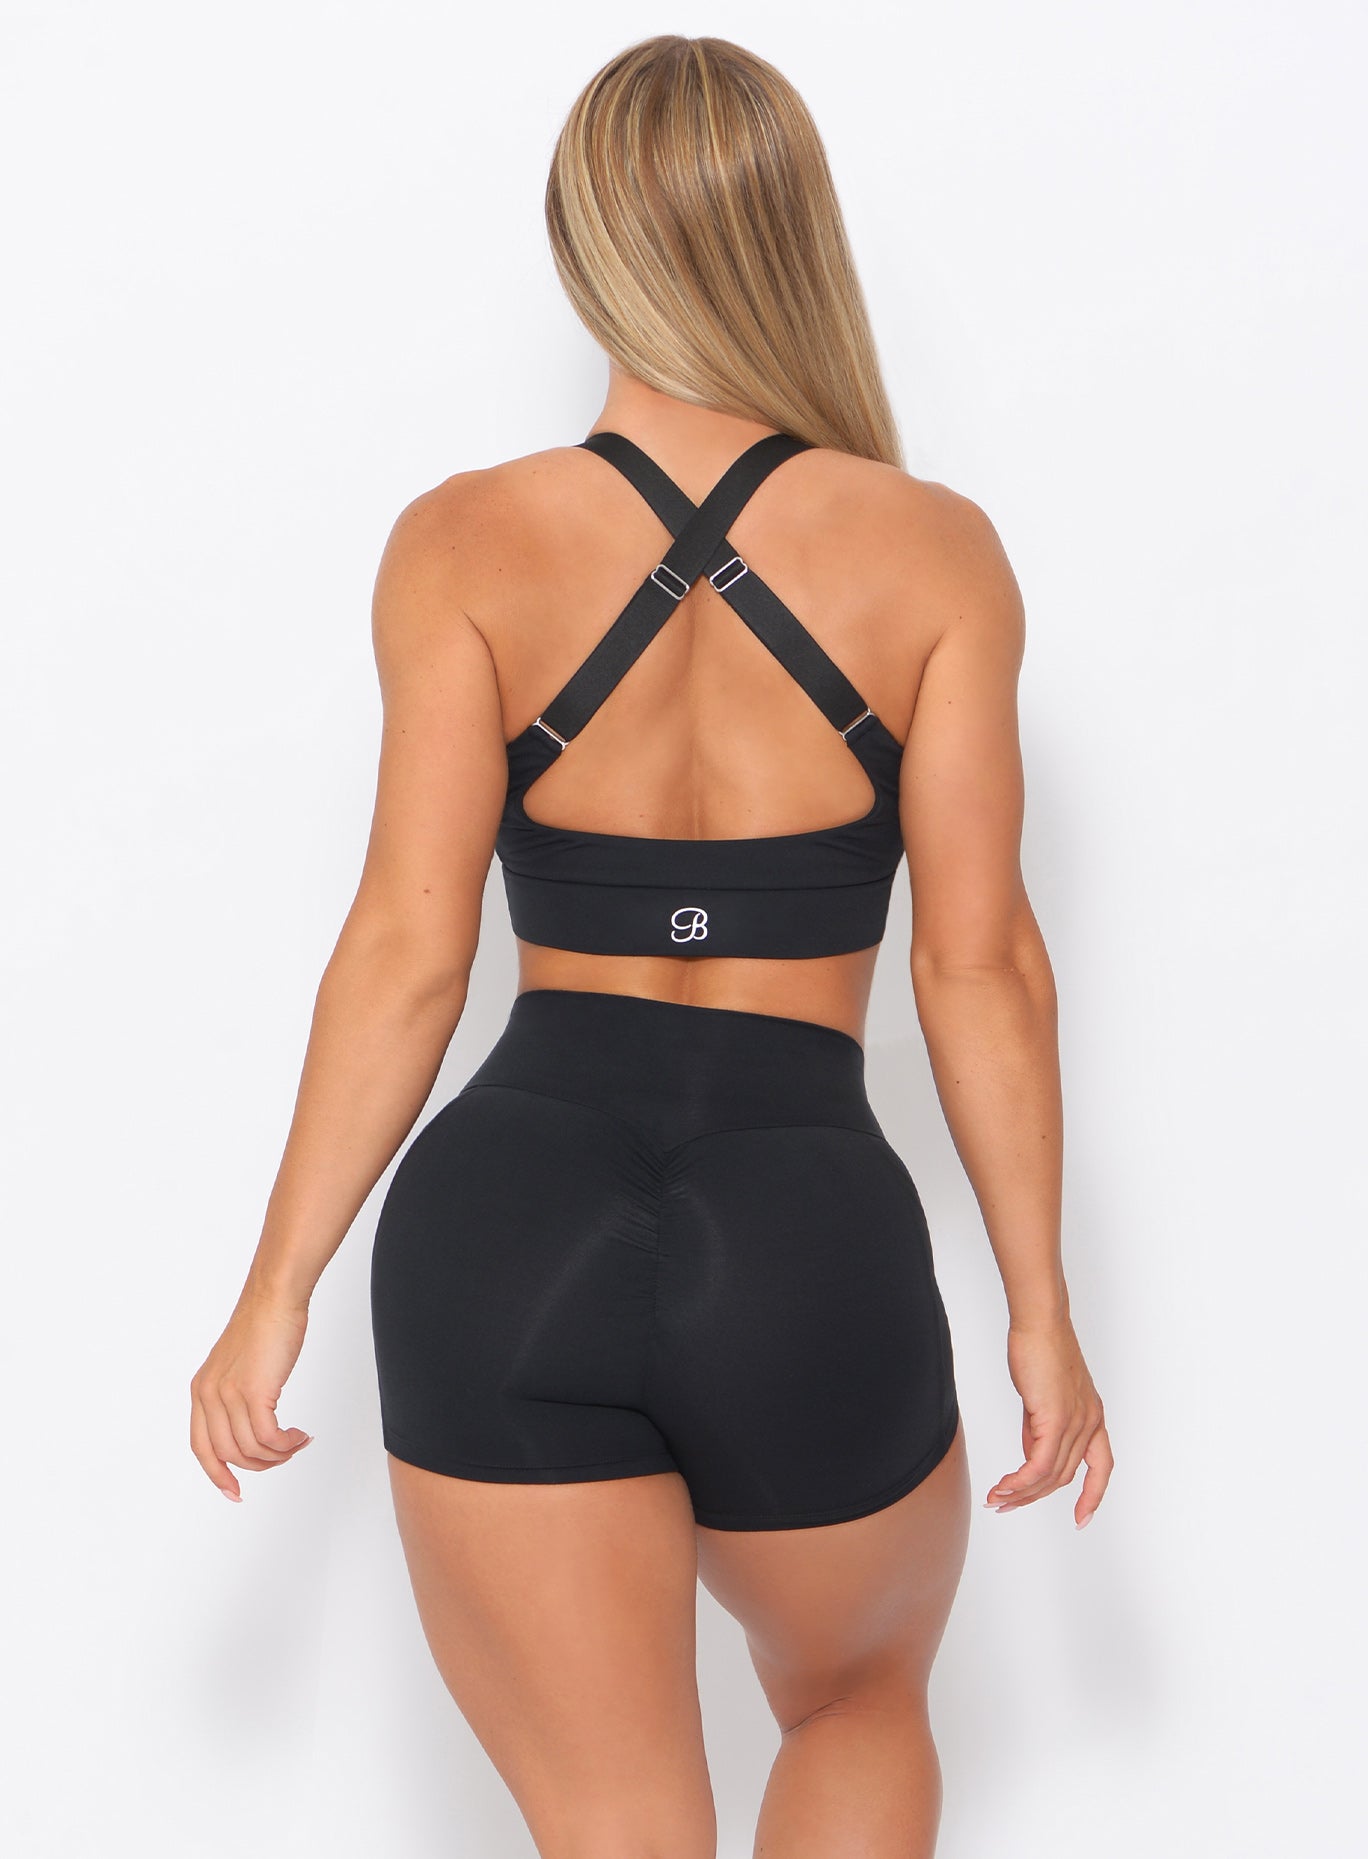 Back view of the model in our twisted sports bra in black color and a matching shorts  